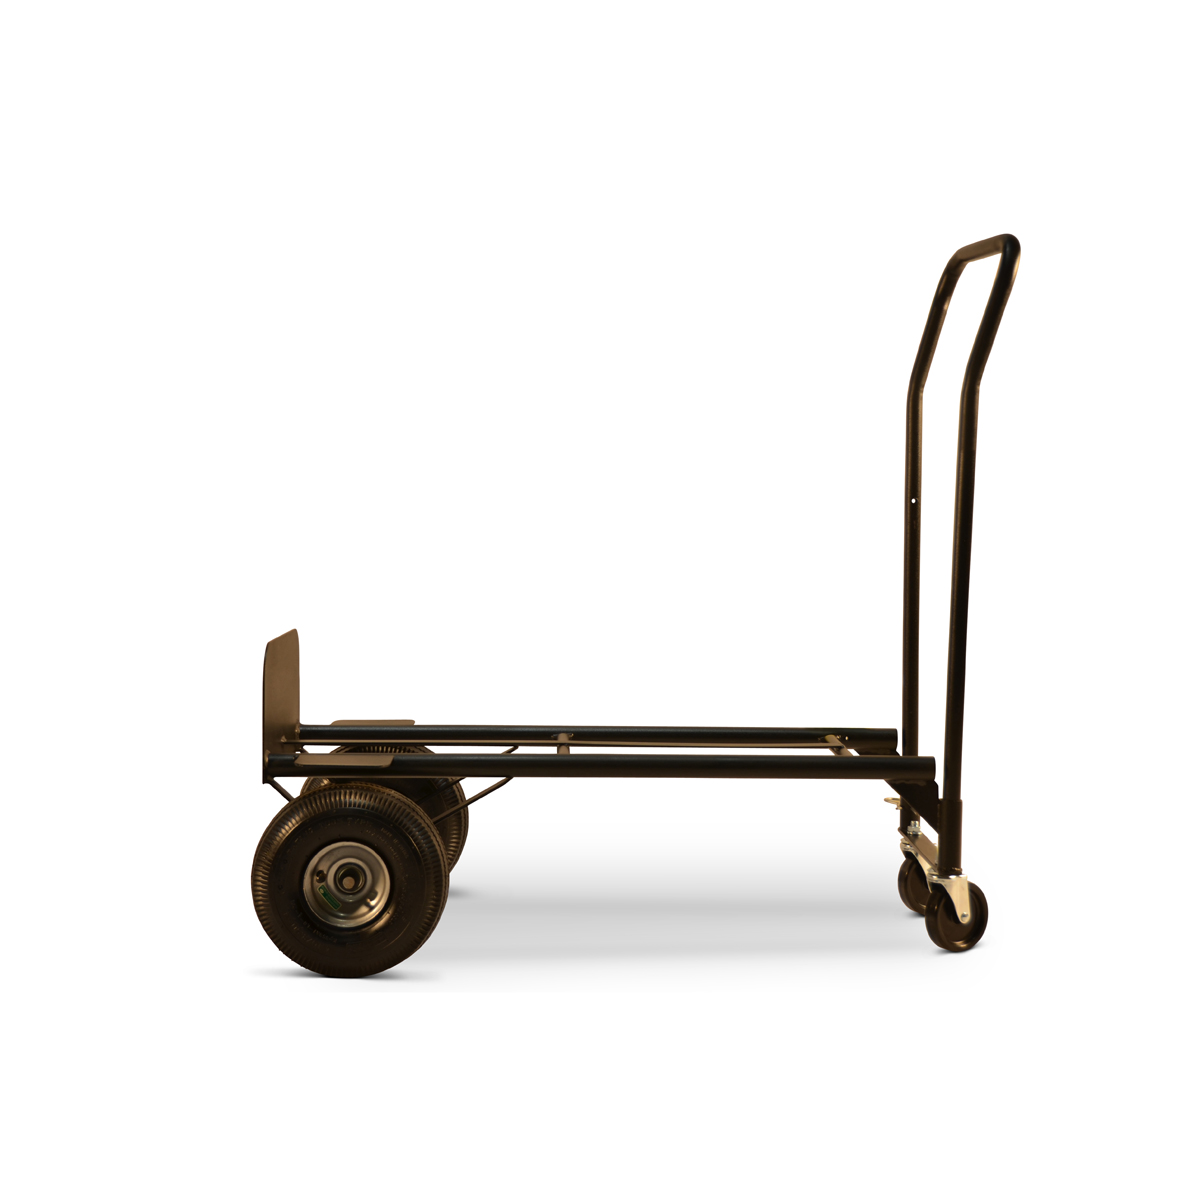 Milwaukee 800 lb. Capacity 2-in-1 Convertible Hand Truck W/10" Pneumatic Tires - image 4 of 4